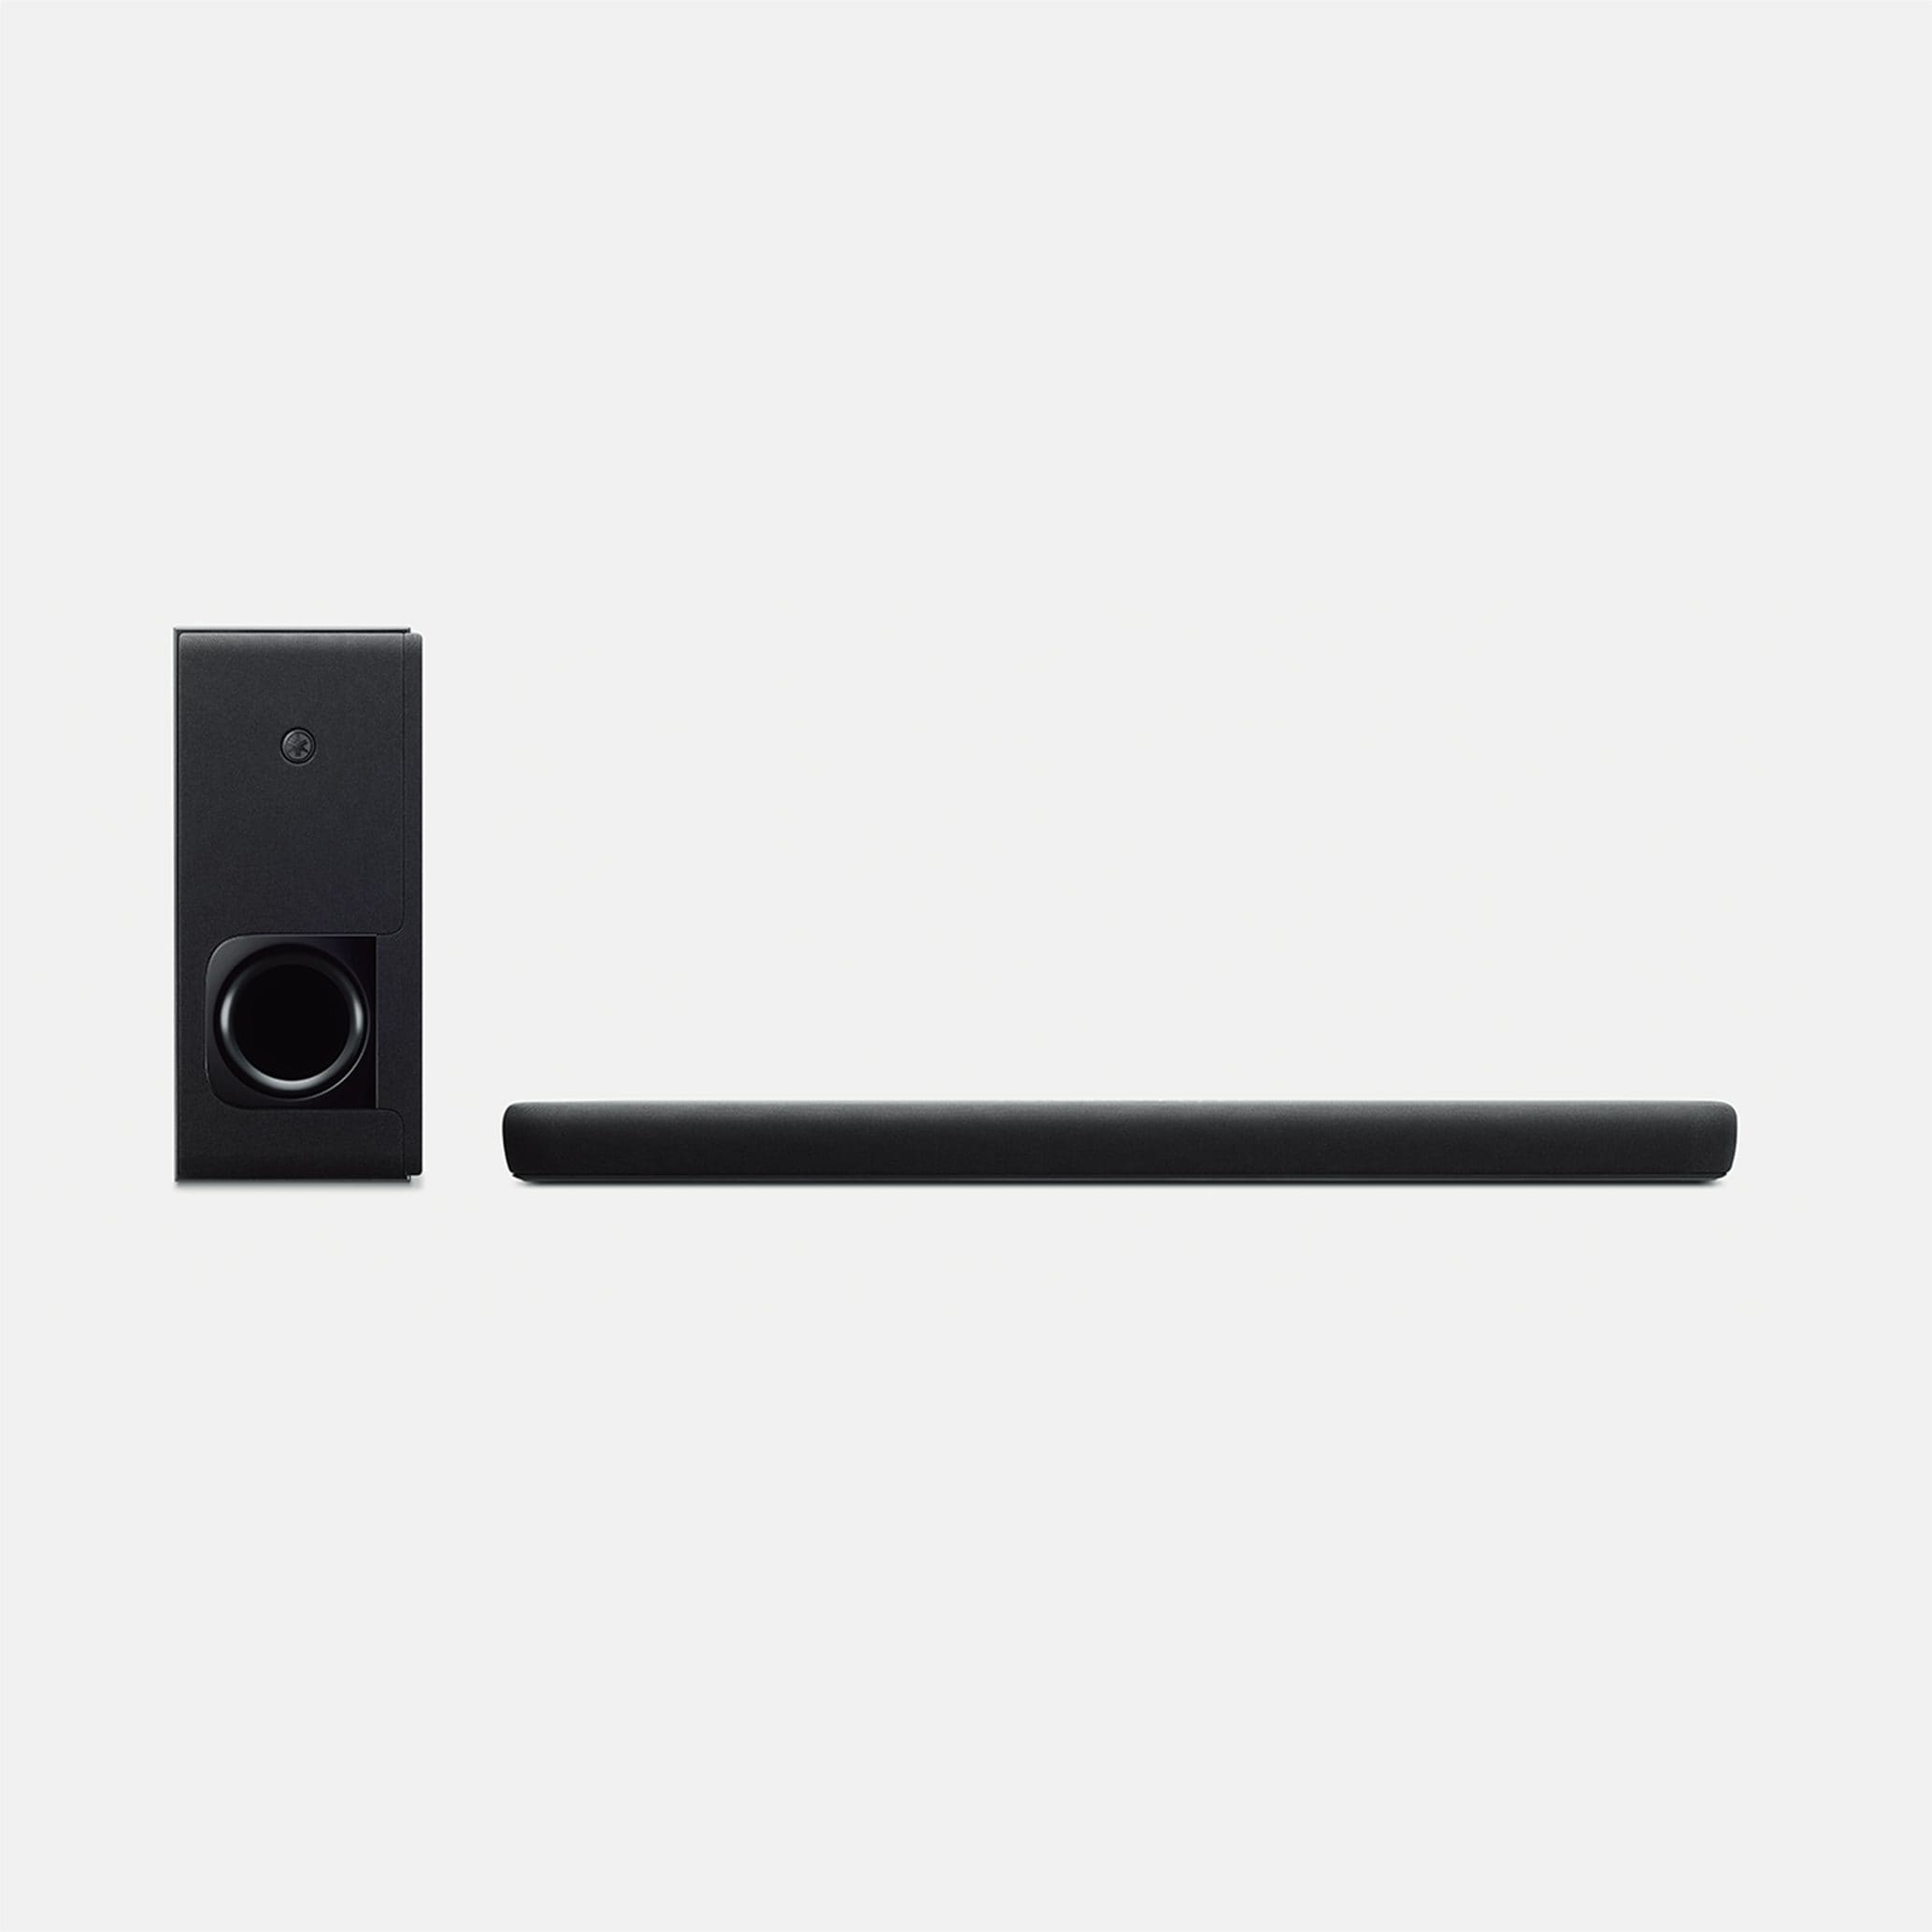 YAS-209 - Overview - Sound Bar - Audio & Visual - Products